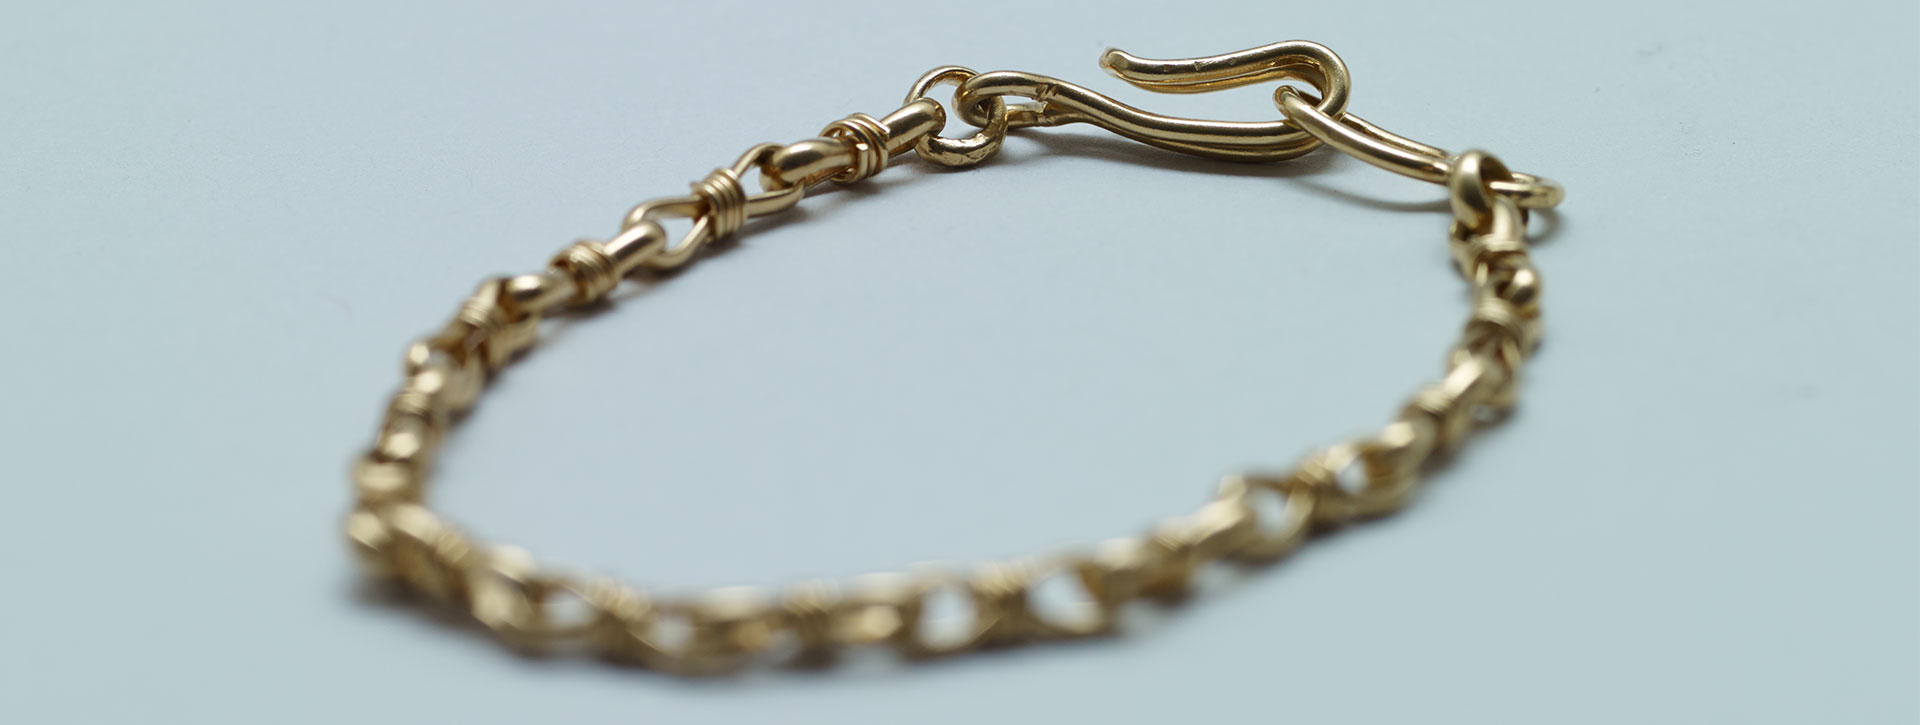 wrapped link chain bracelet 18k gold plated